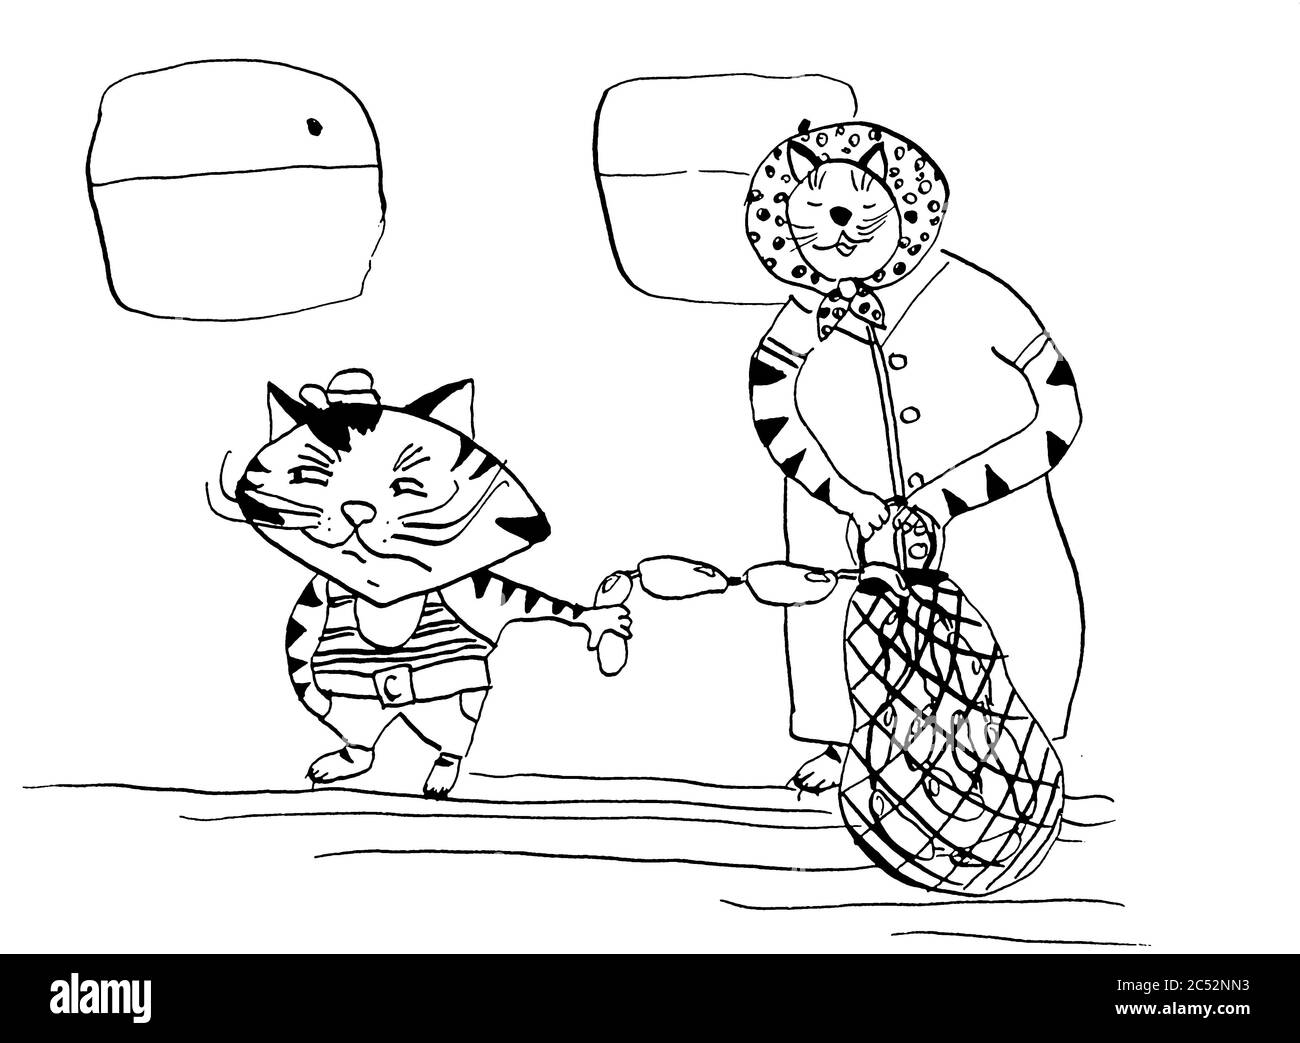 Cat steals some food - sausages from a woman in a bus. Illustration. Sketch style in black and white Stock Photo